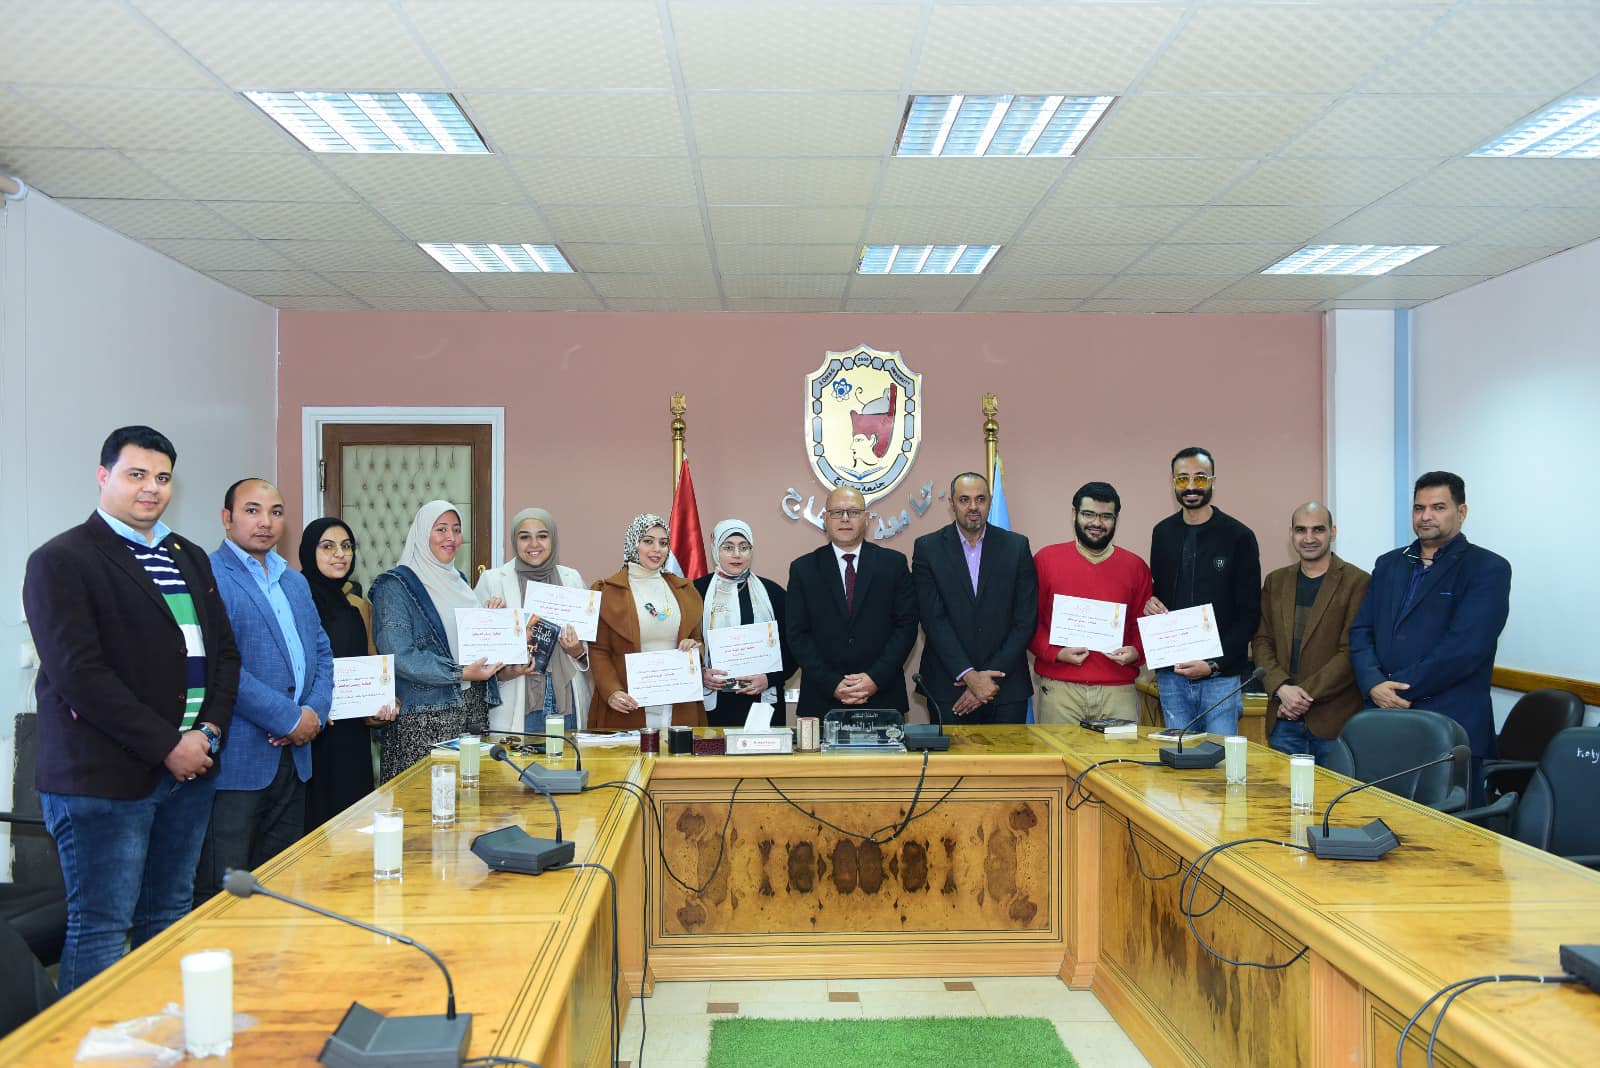 Sohag University President honors 7 of the University’s Employees for Participating with their Books in the Cairo International Book Fair in its 55th Session